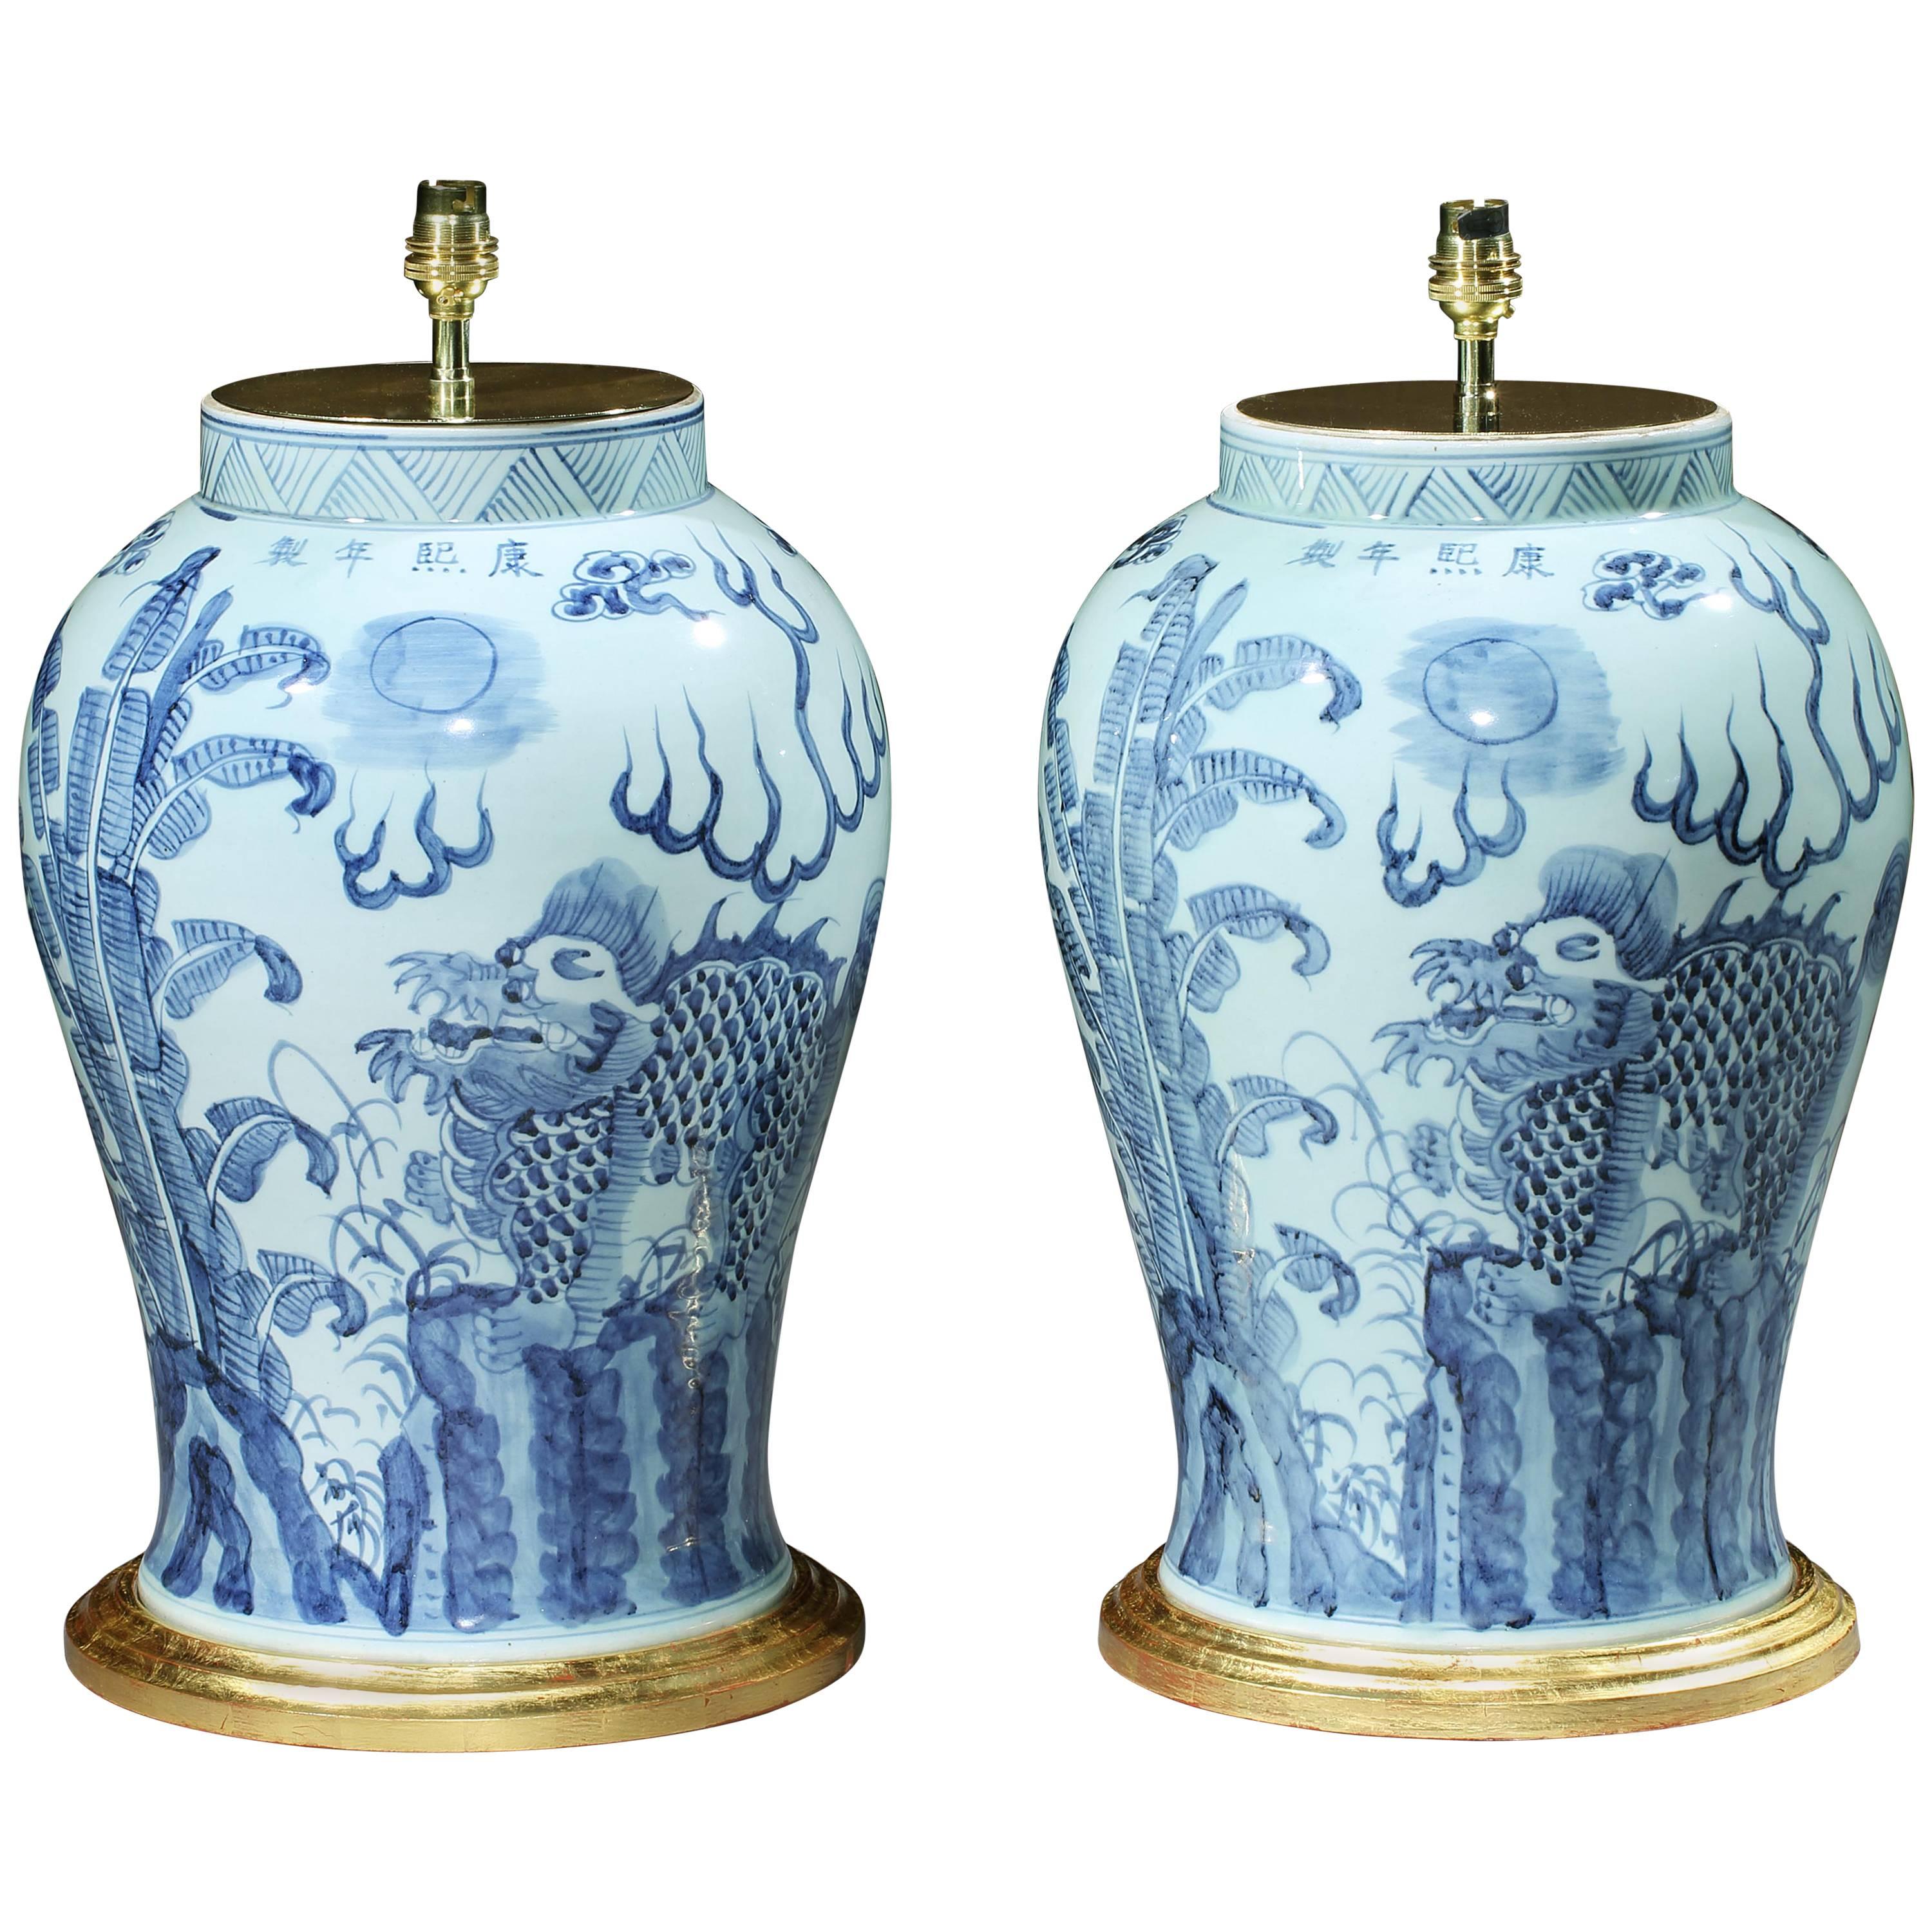 Pair of Blue and White Chinese Vases with Foo Dogs